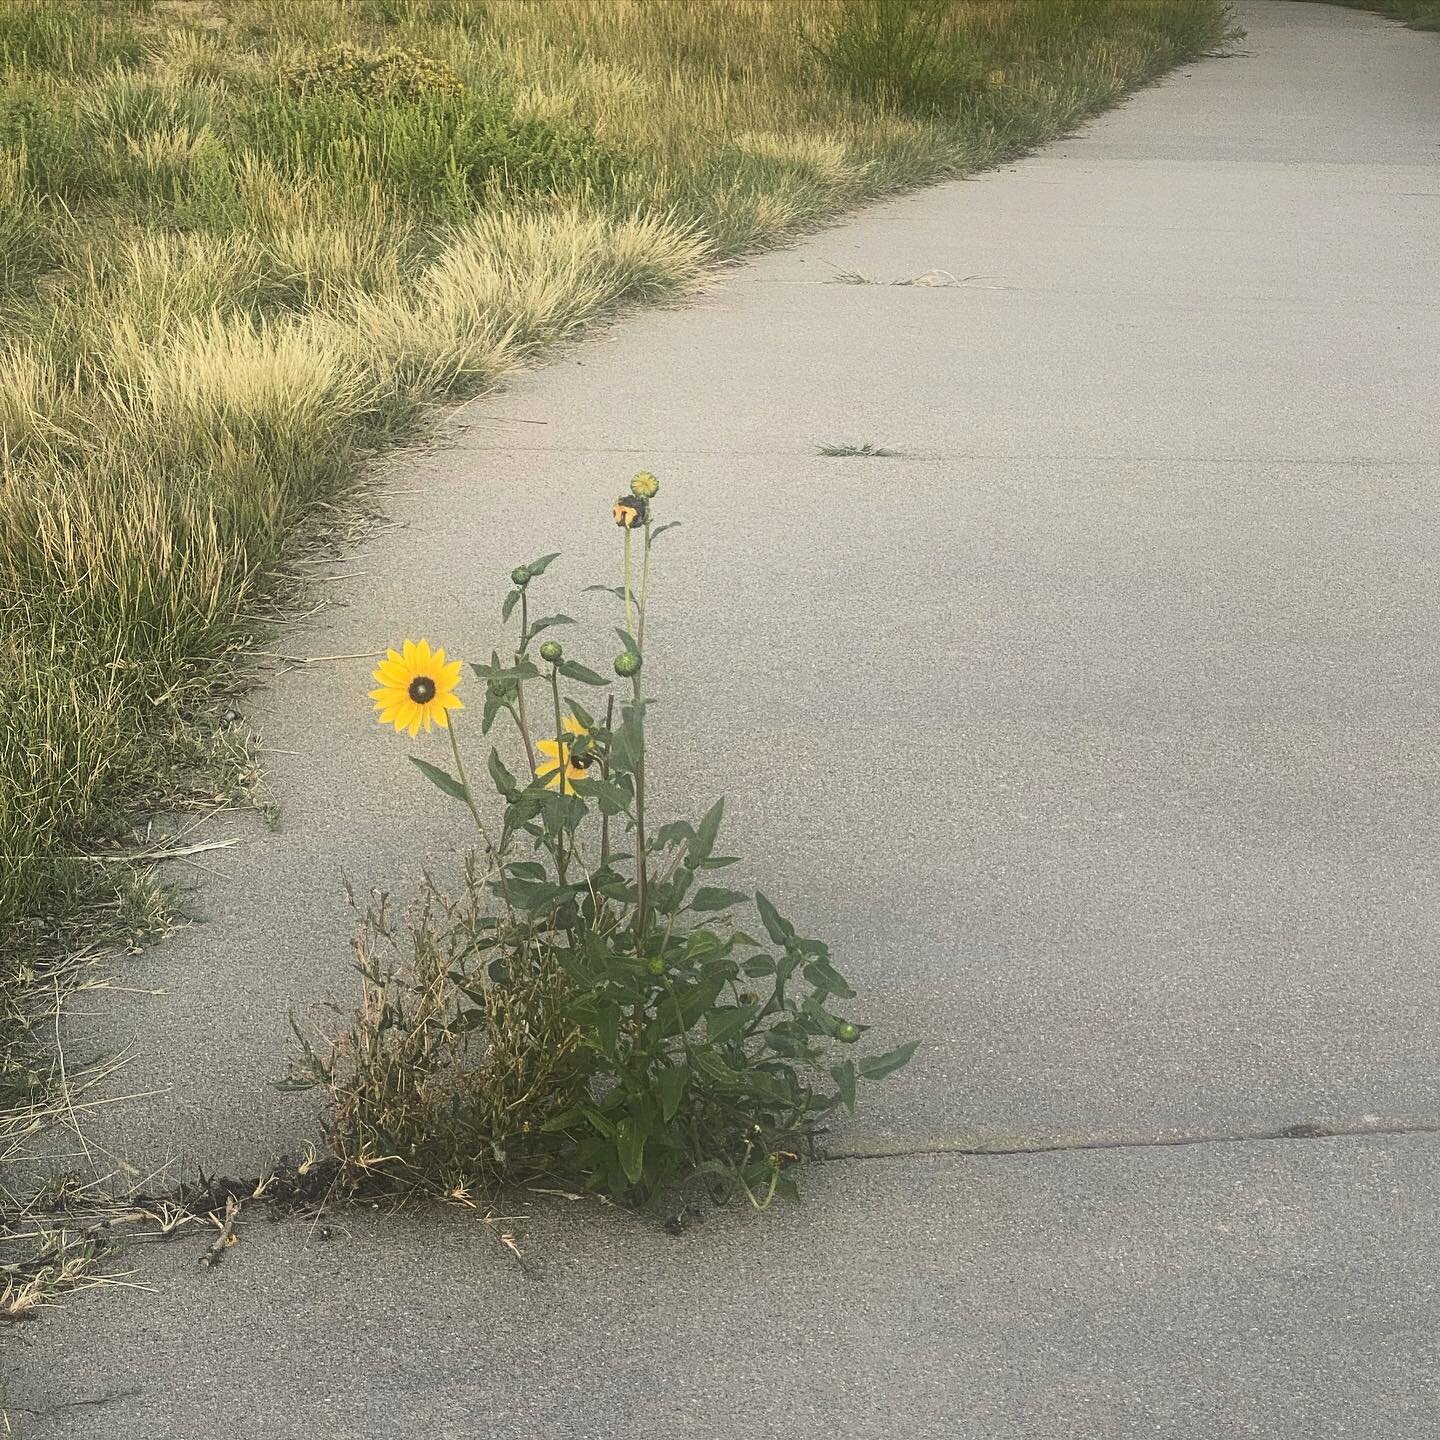 Do you think this wild flower asked permission before is sprouted here? Do you think it doubted its ability to bloom knowing there were difficult barriers to break through?
Do you think this flower worried about being an inconvenience for where it ro